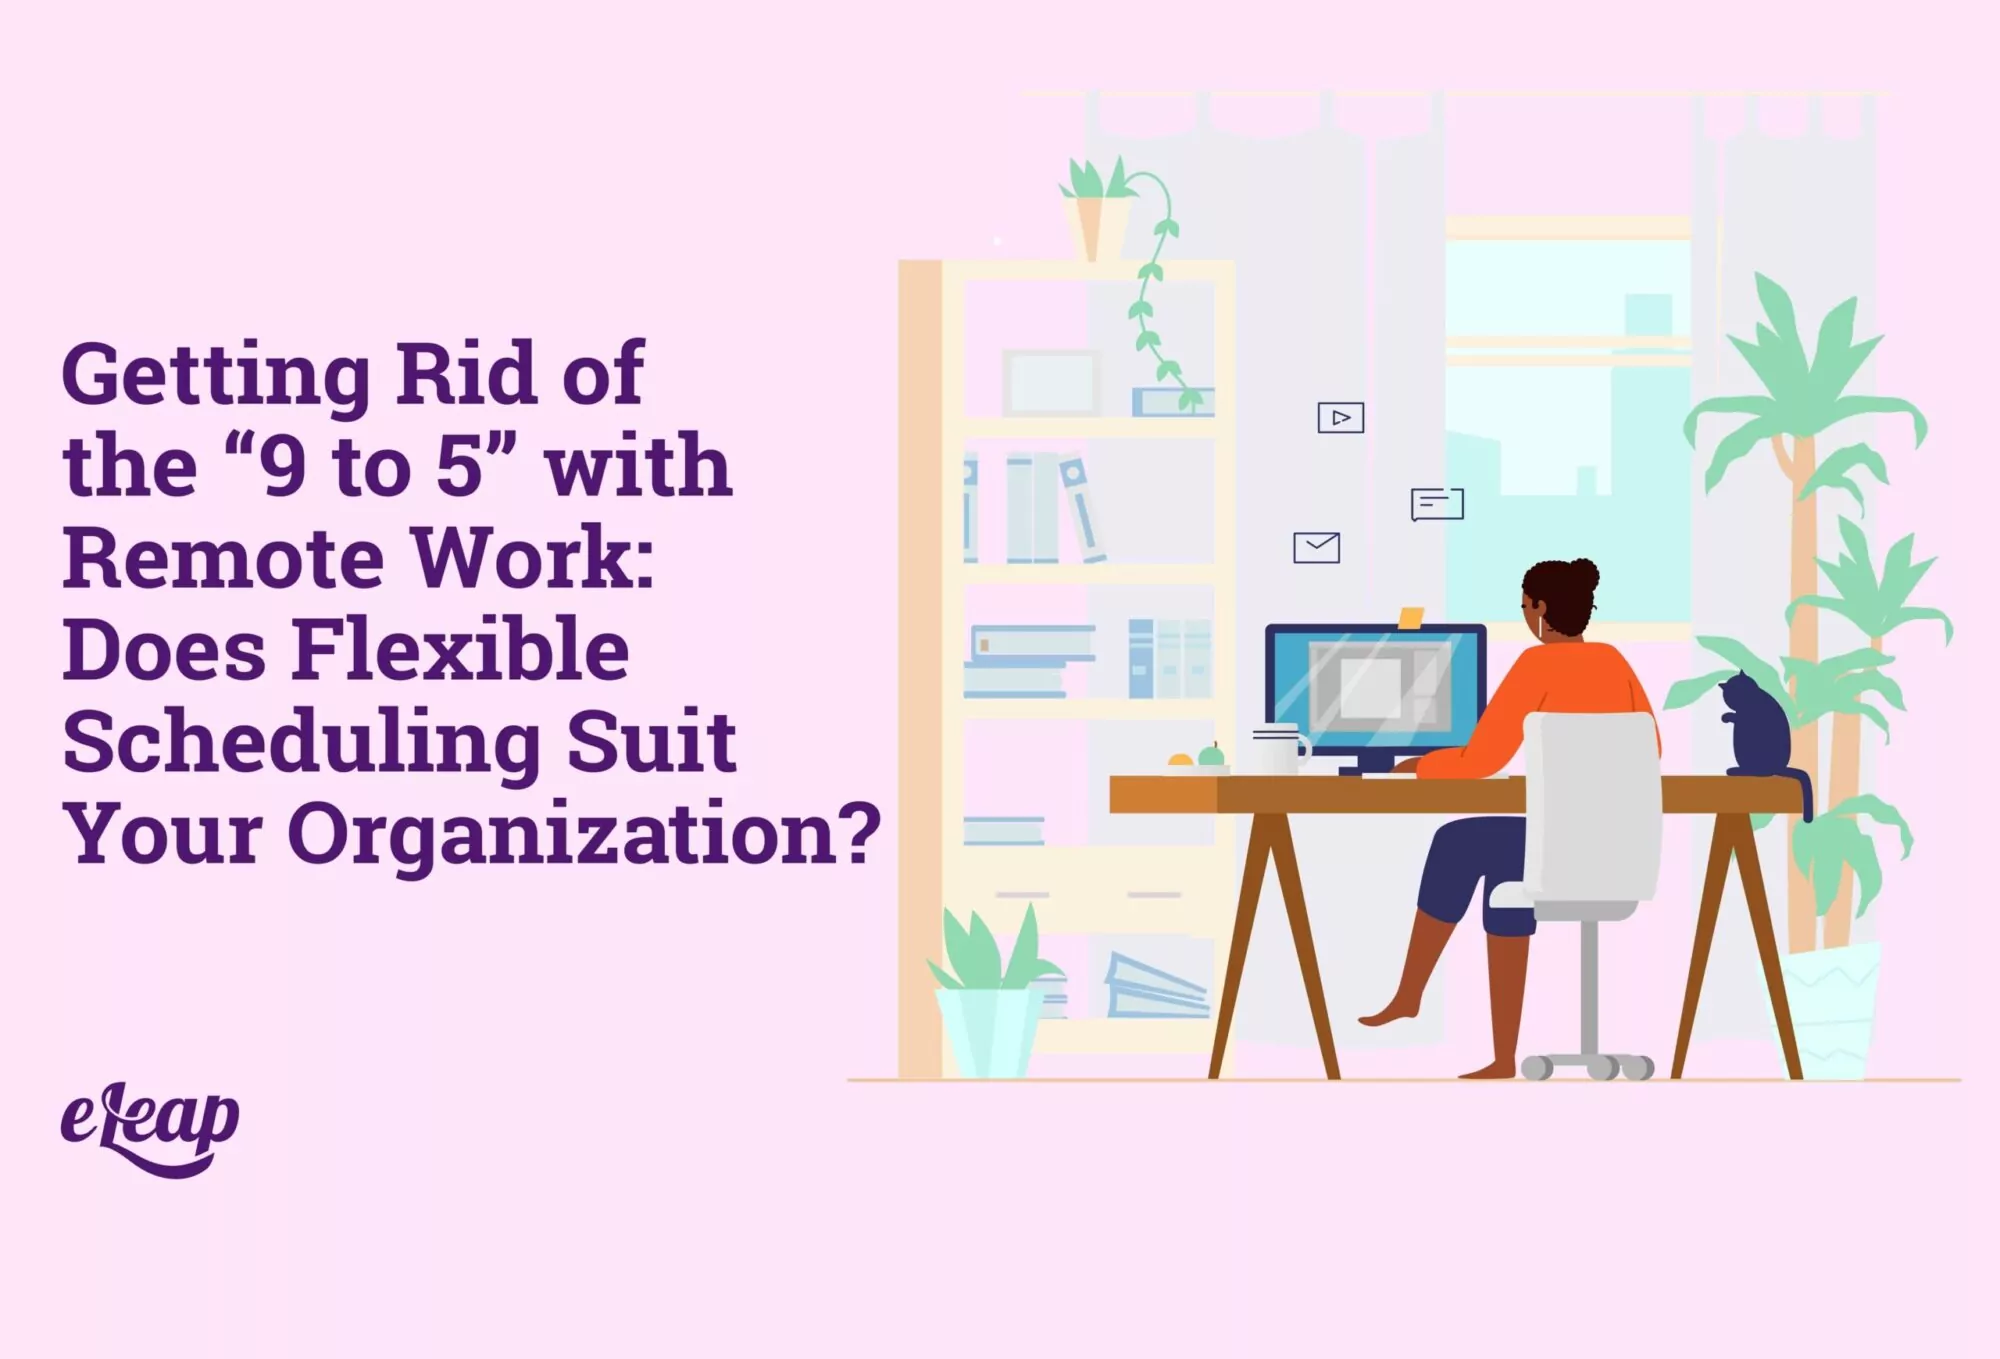 Getting Rid of the “9 to 5” with Remote Work: Does Flexible Scheduling Suit Your Organization?